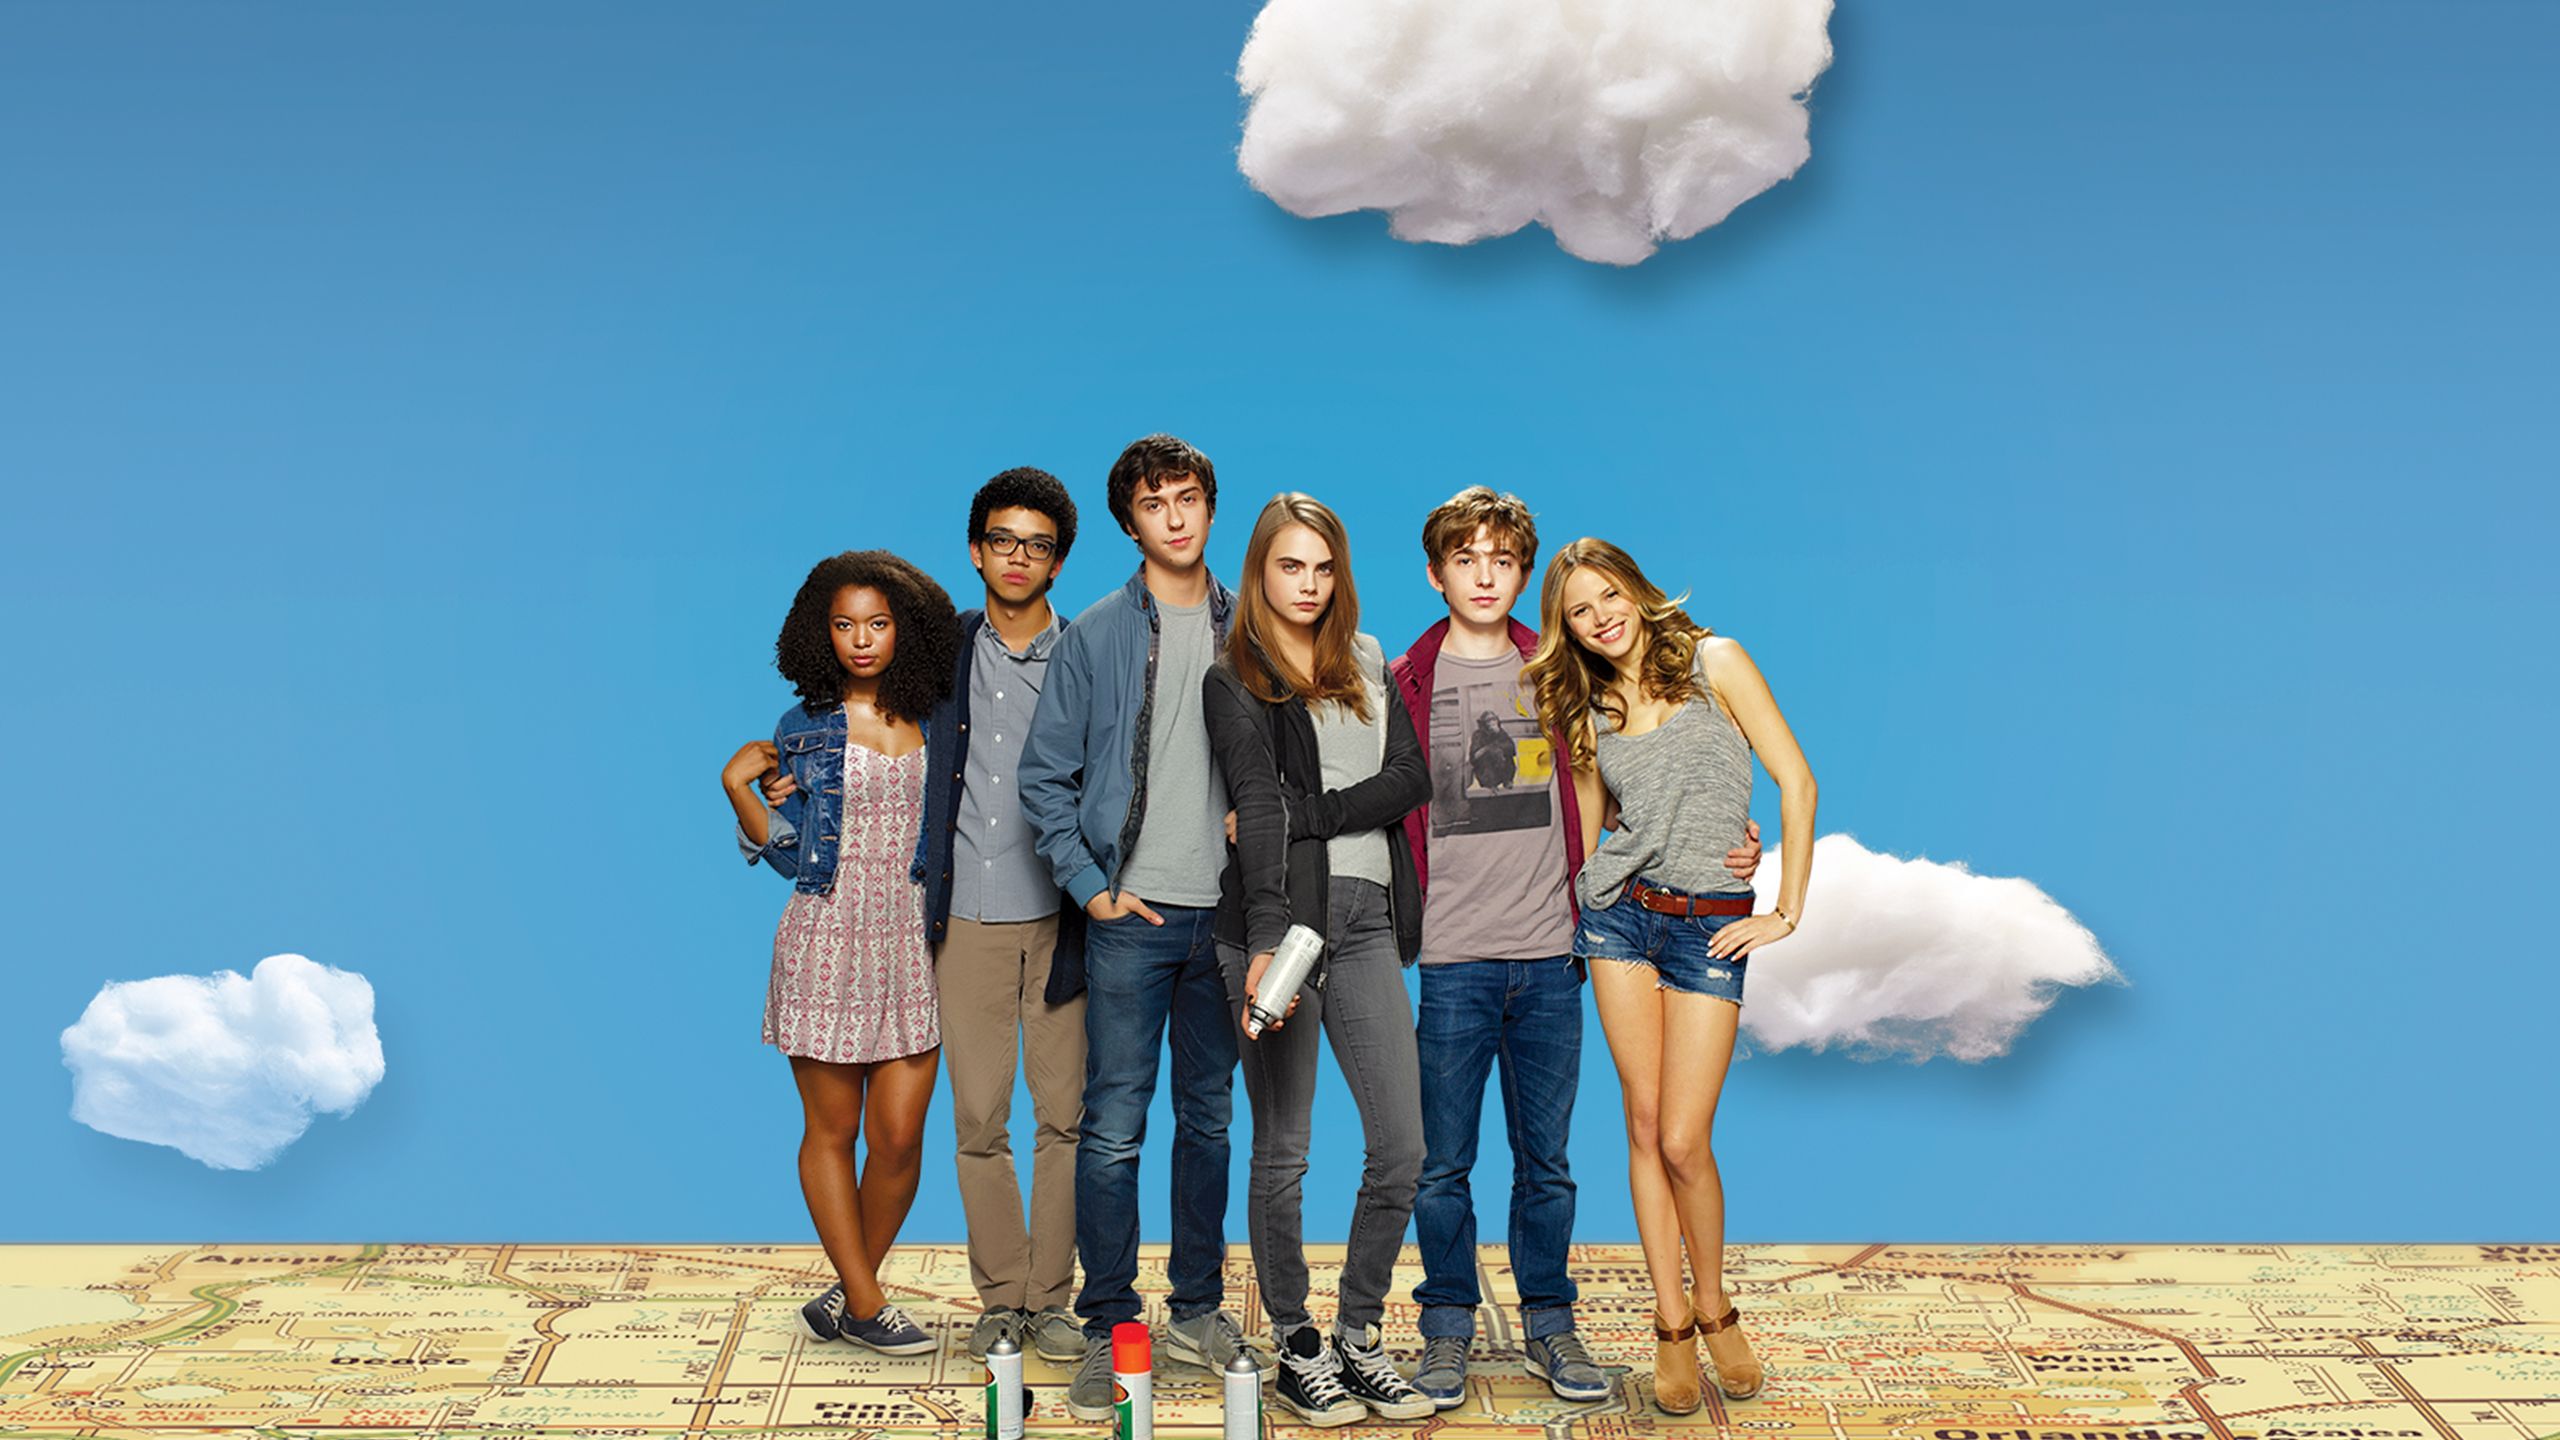 paper towns full movie download